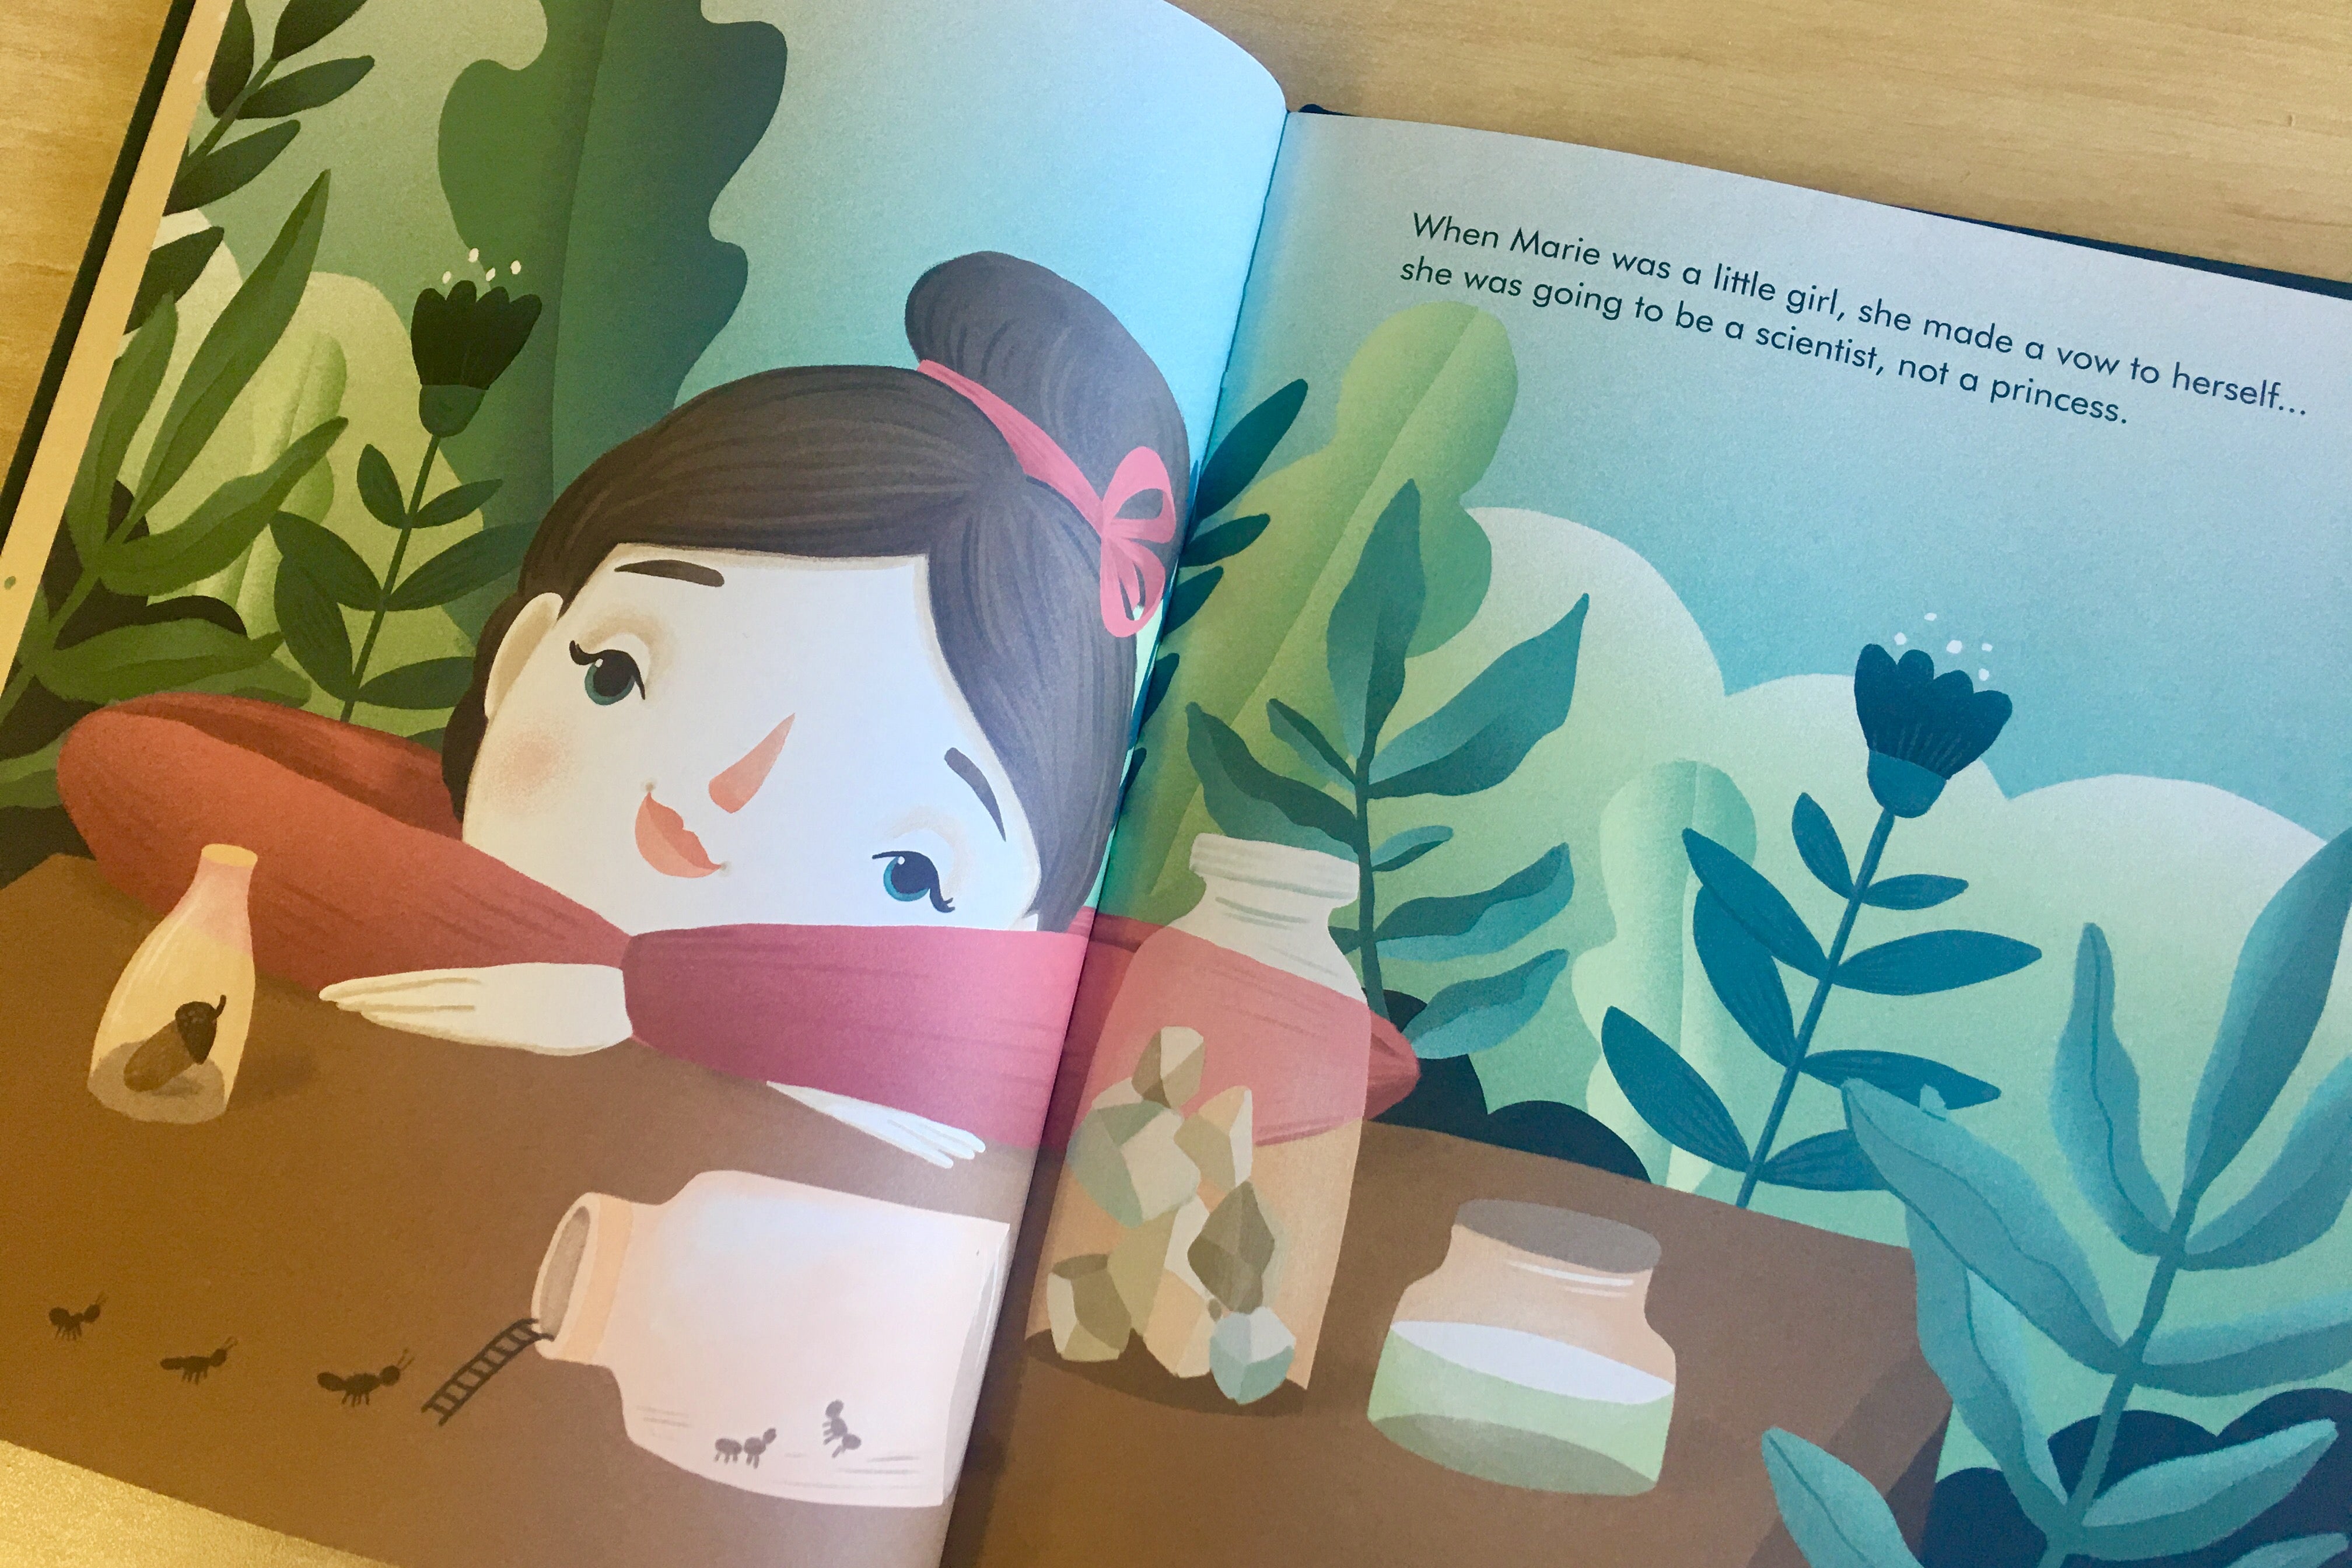 Empowering Kids Books at Biome - Little People, Big Dreams